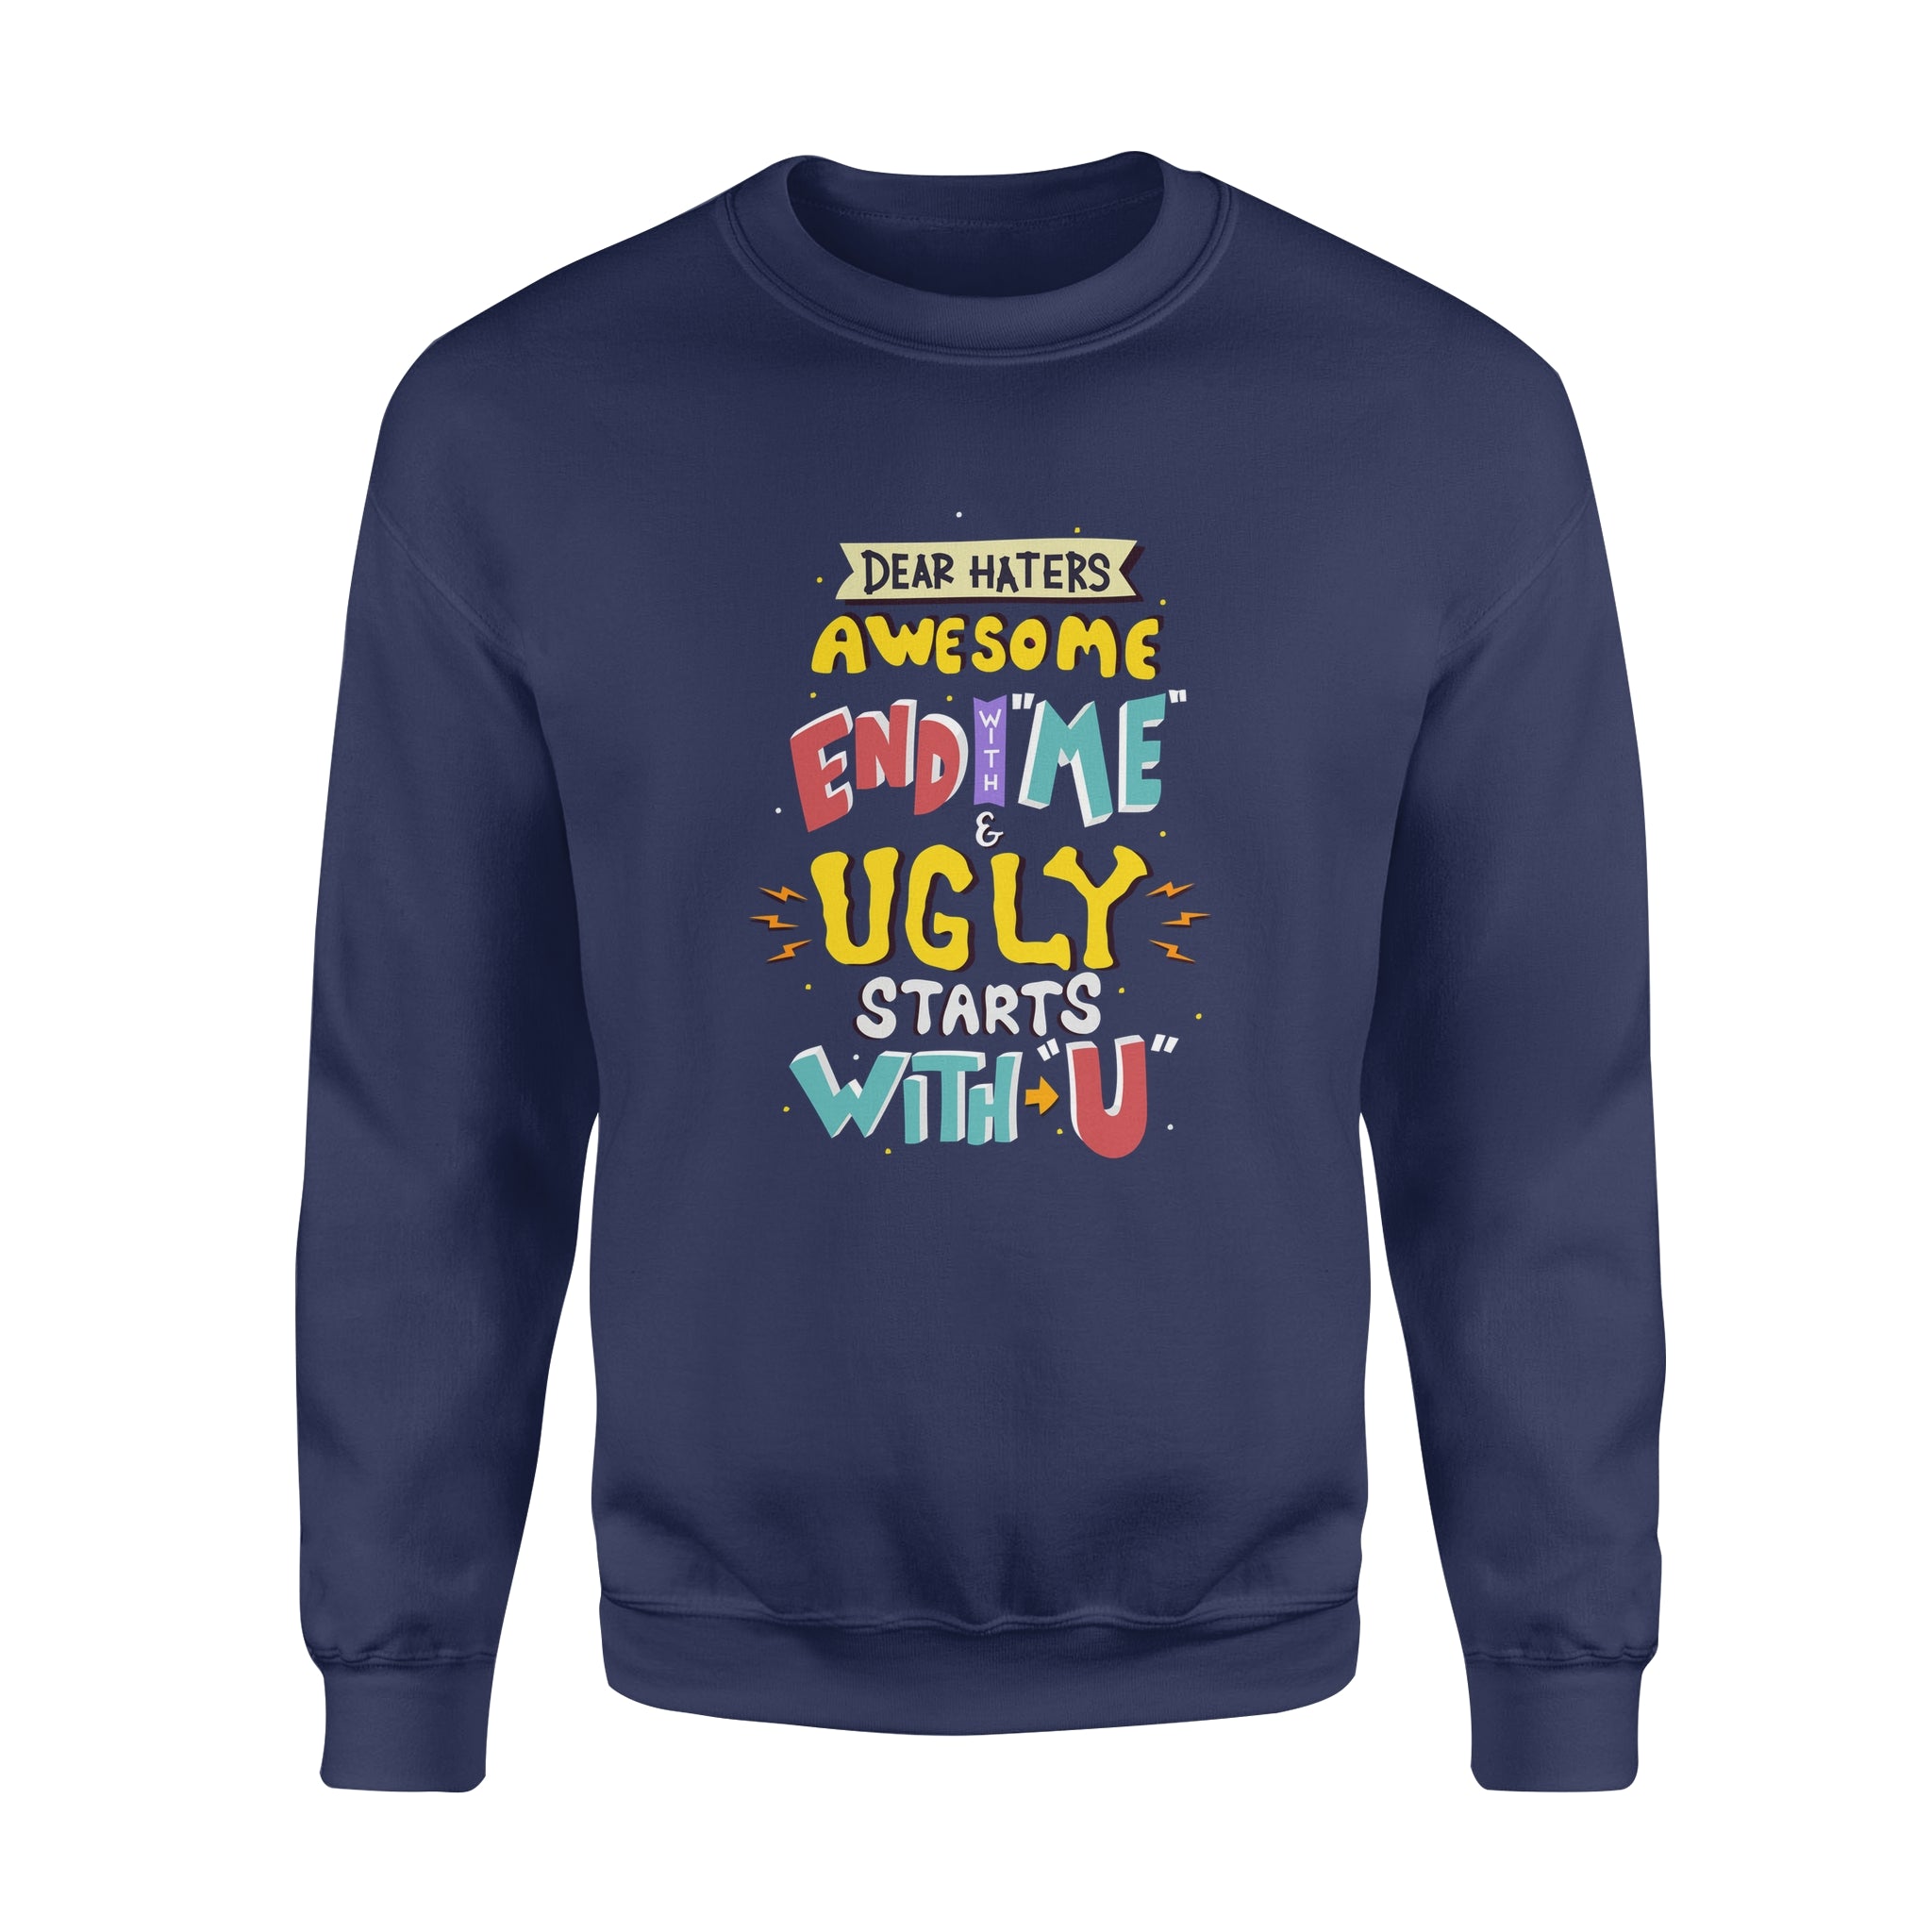 Dear Hates Awesome End With Me and Ugly Starts With You - Fleece Sweatshirt